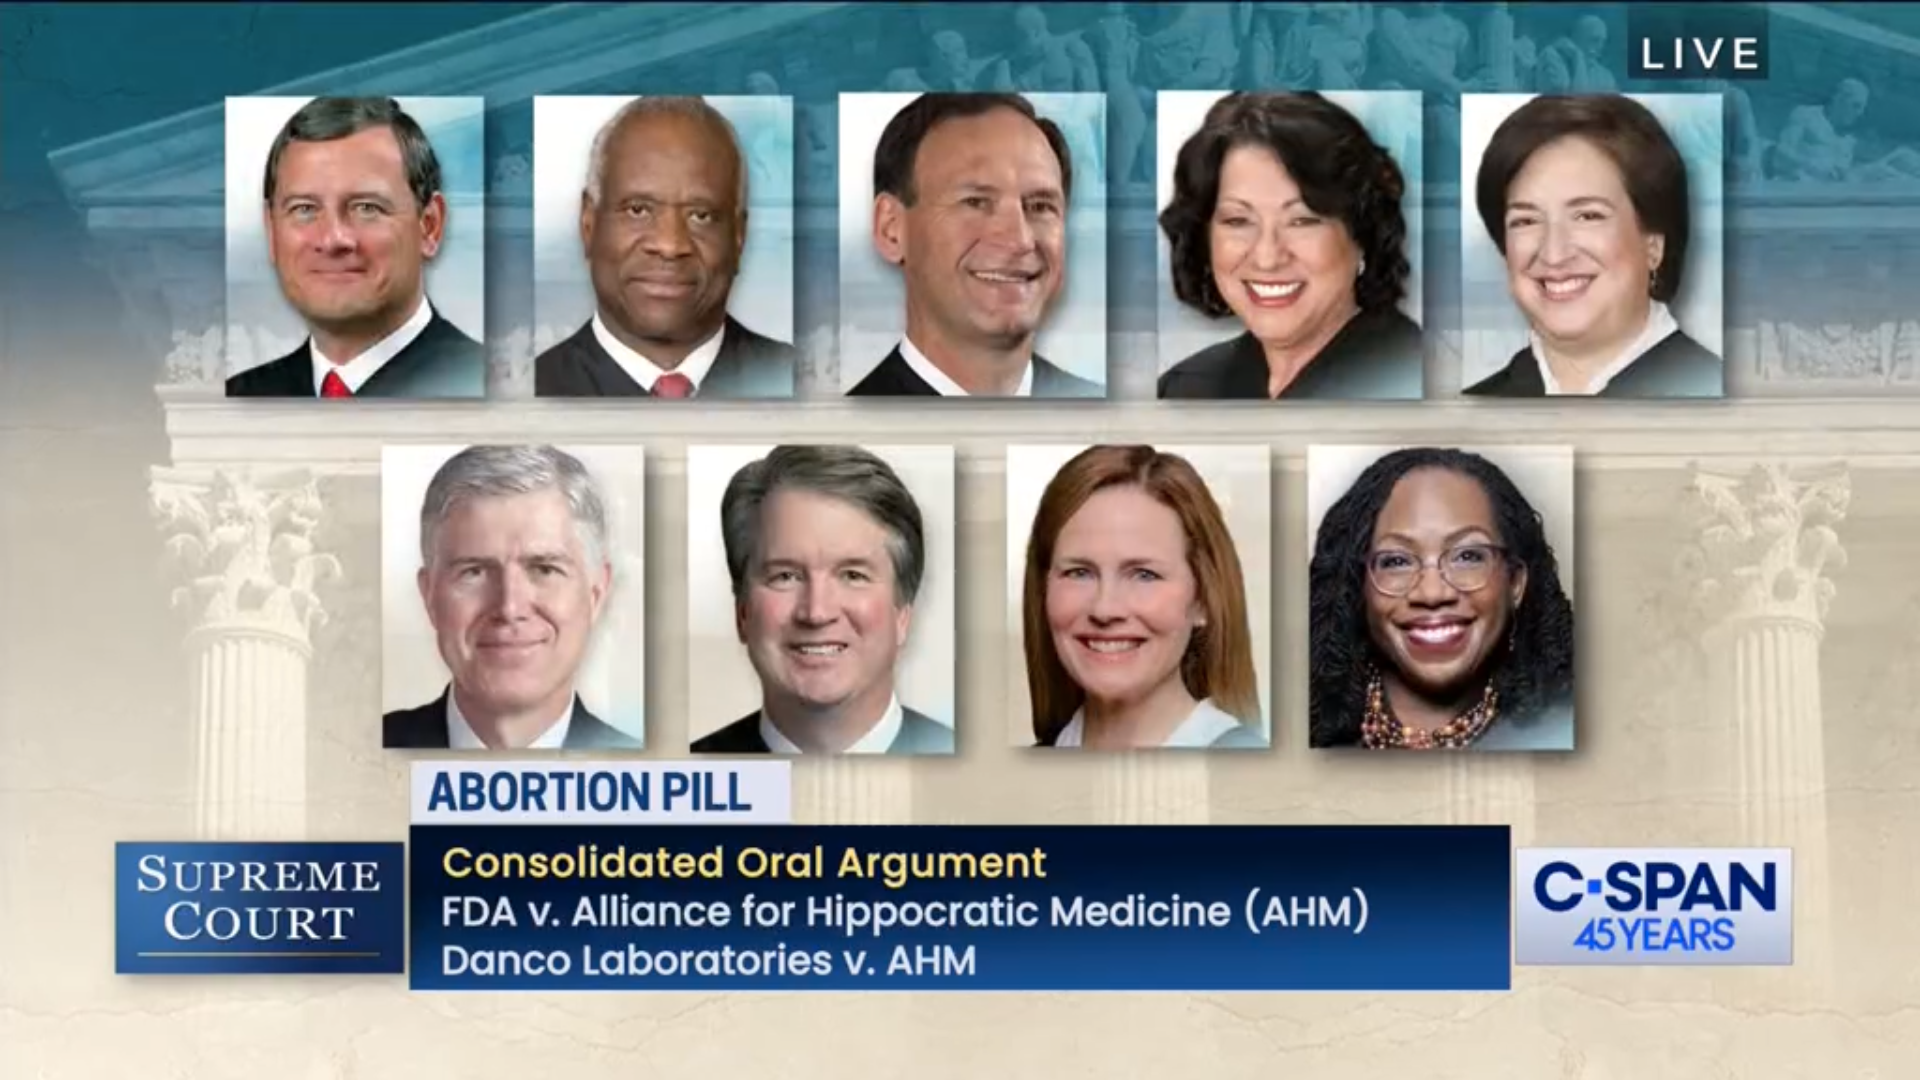 screenshot of C-span featuring headshots of all 9 judges on the Supreme Court